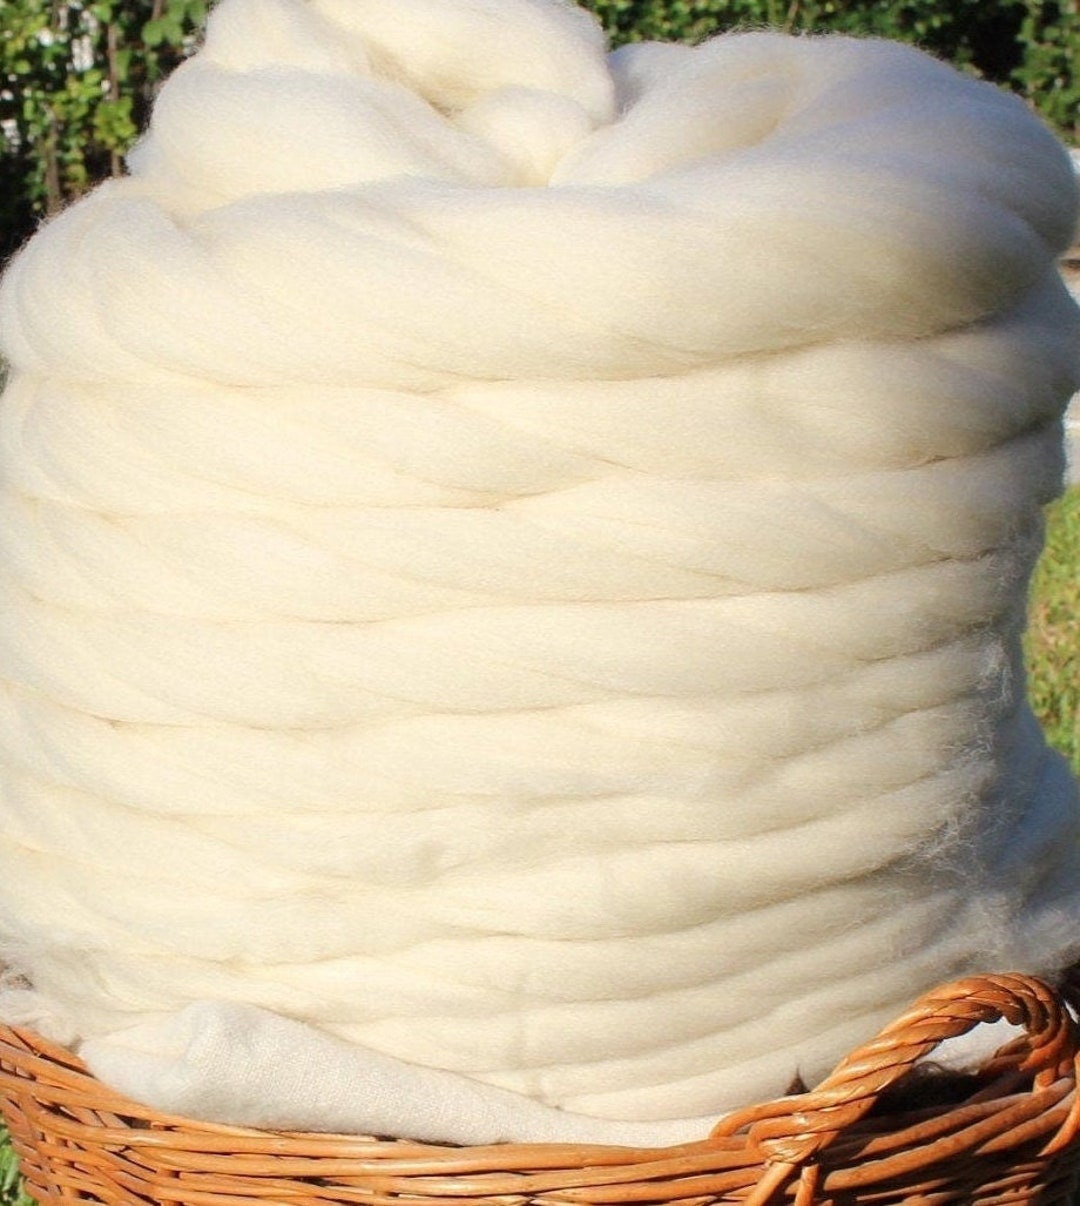 100% Natural White Wool Roving Top, 8 OZ Corriedale, from USA Mill, Best  Core Wool for Needle Felting, Wet Felting, Spinning, Dryer Balls, Stuffing